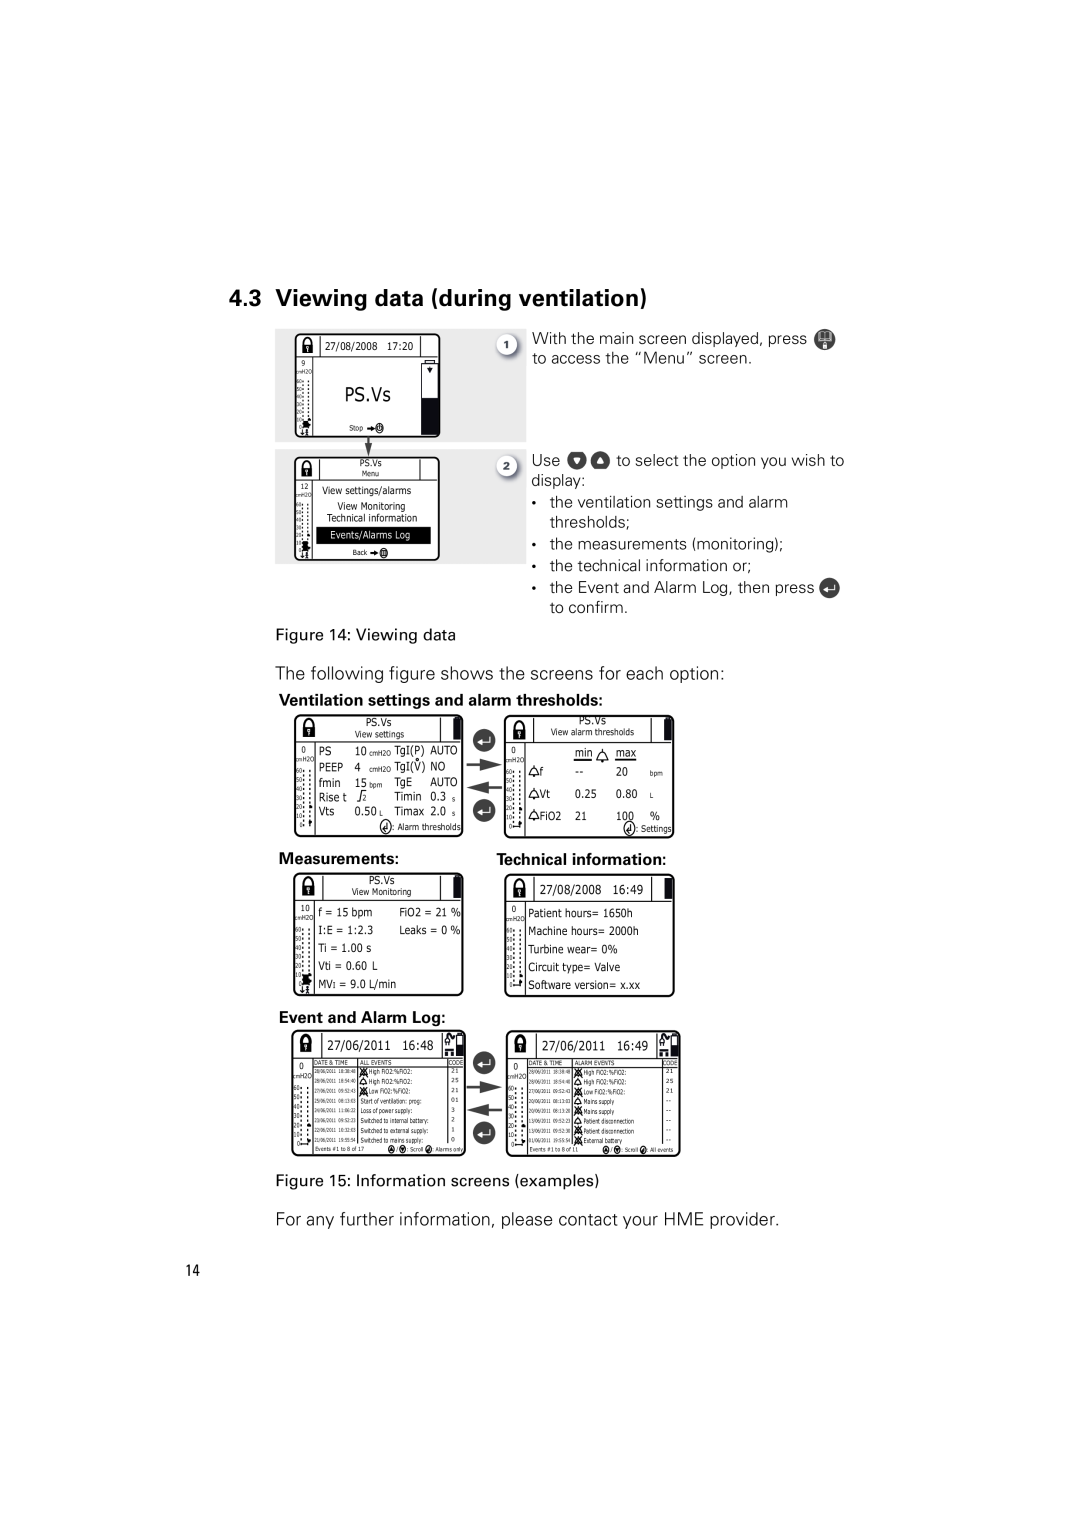 ResMed VS III user manual Viewing data during ventilation, Ventilation settings and alarm thresholds, Measurements 